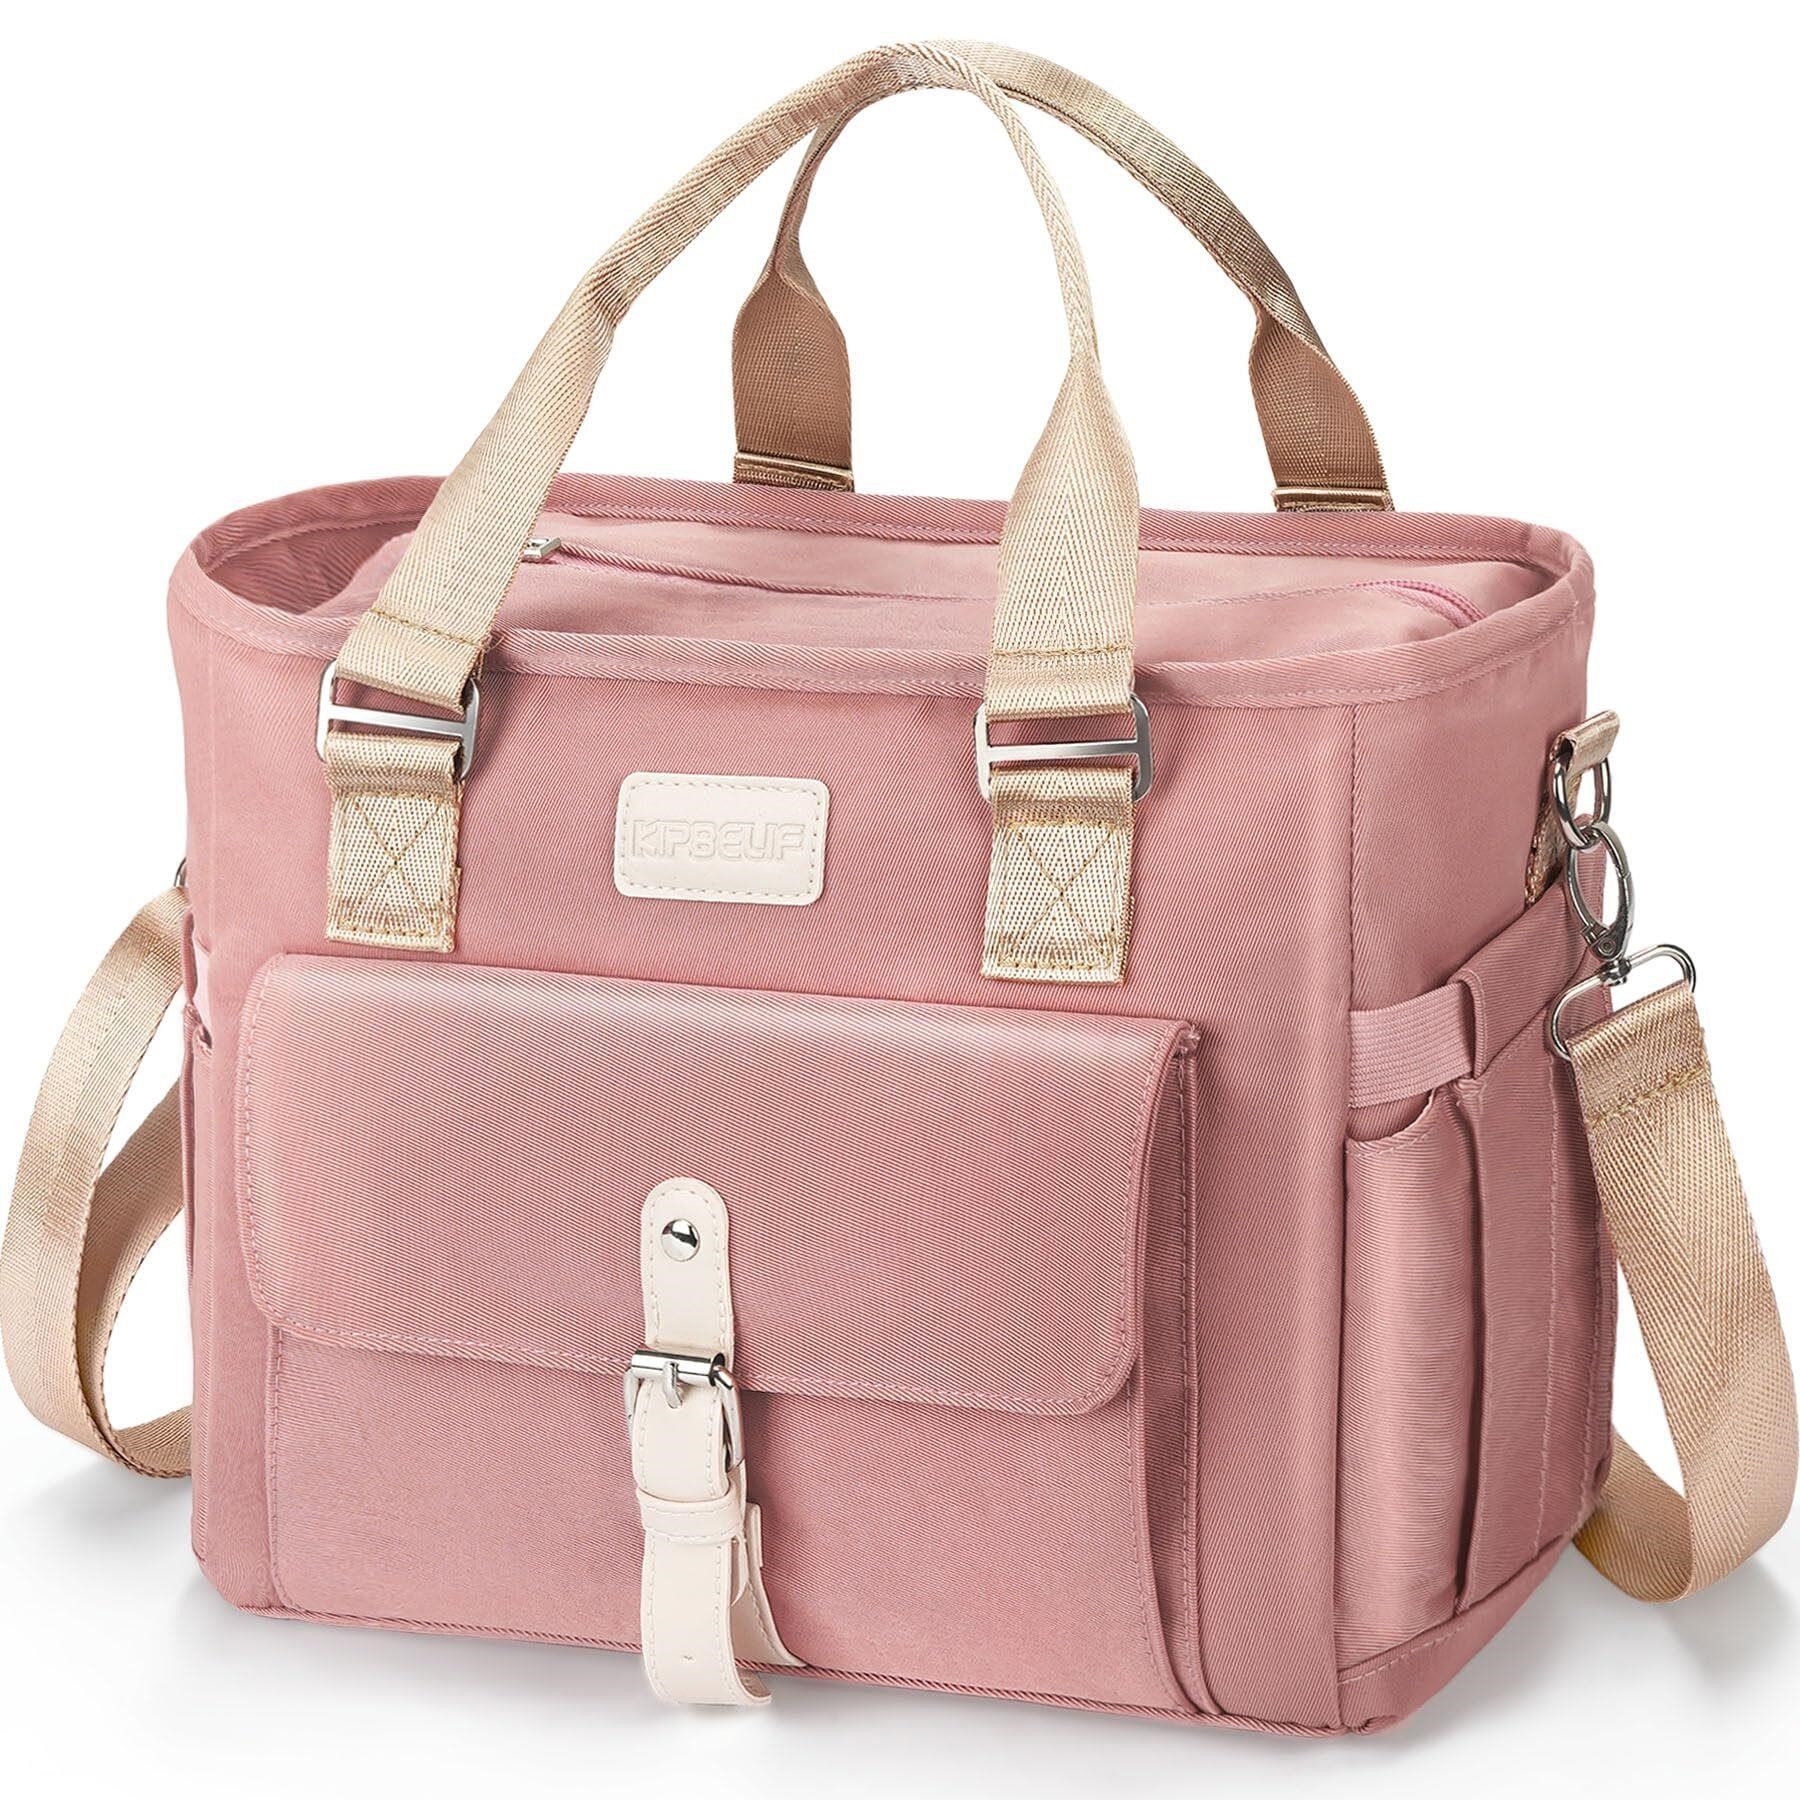 KIPBELIF Cute&Classy Roomy Insulated Lunch Bags